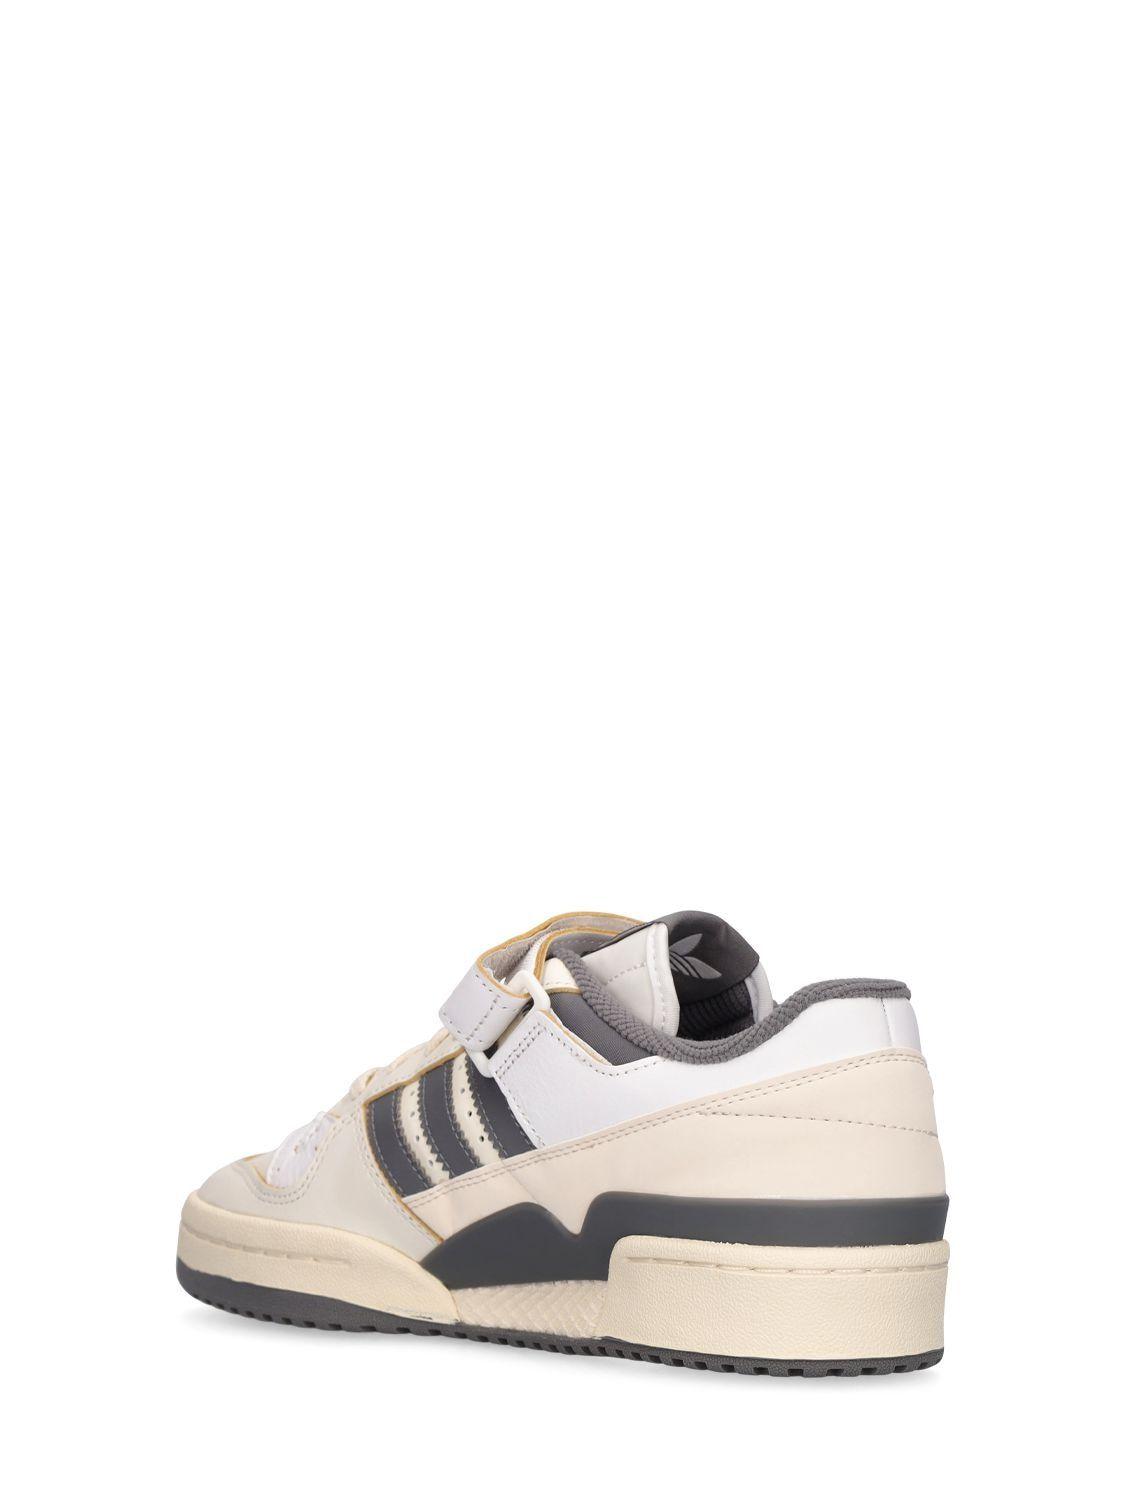 adidas Forum 84 Low W Sneakers in White | Lyst